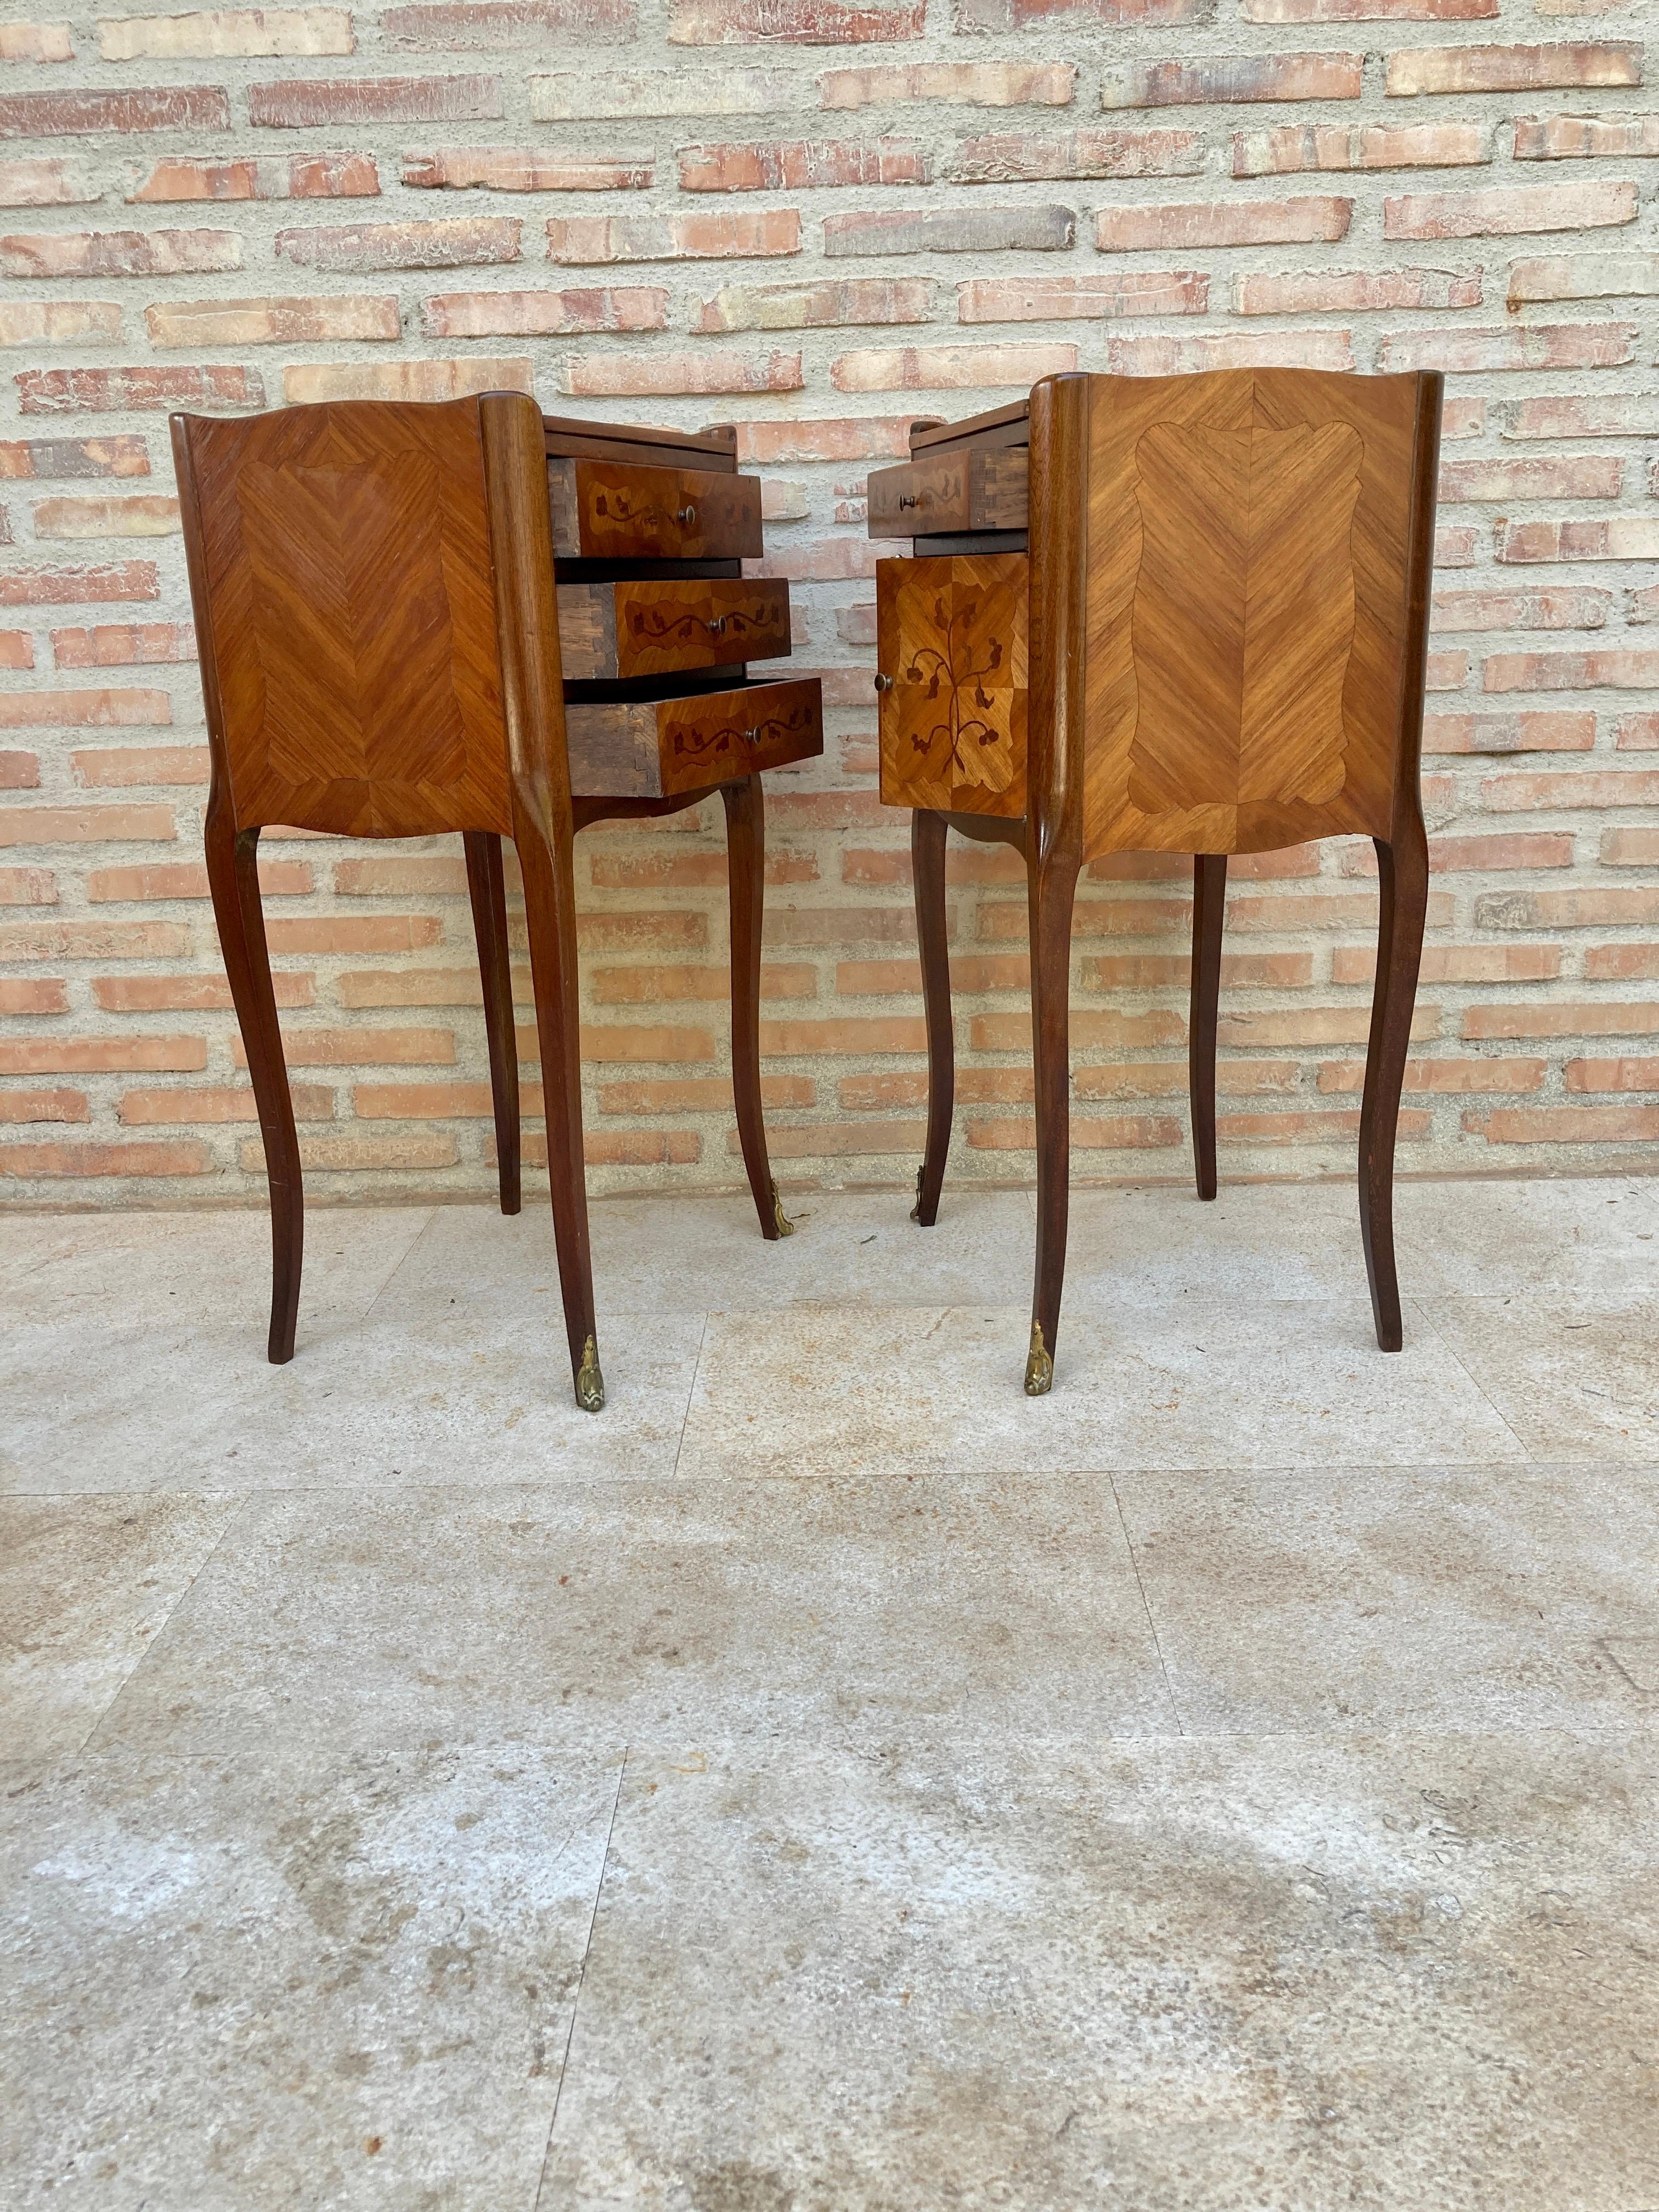 Matching Louis XV style kingwood bedside tables, distinguished from each other because one has three drawers and the other has a drawer and a front door, with floral marquetry on the top and front. The pieces retain their original and beautiful